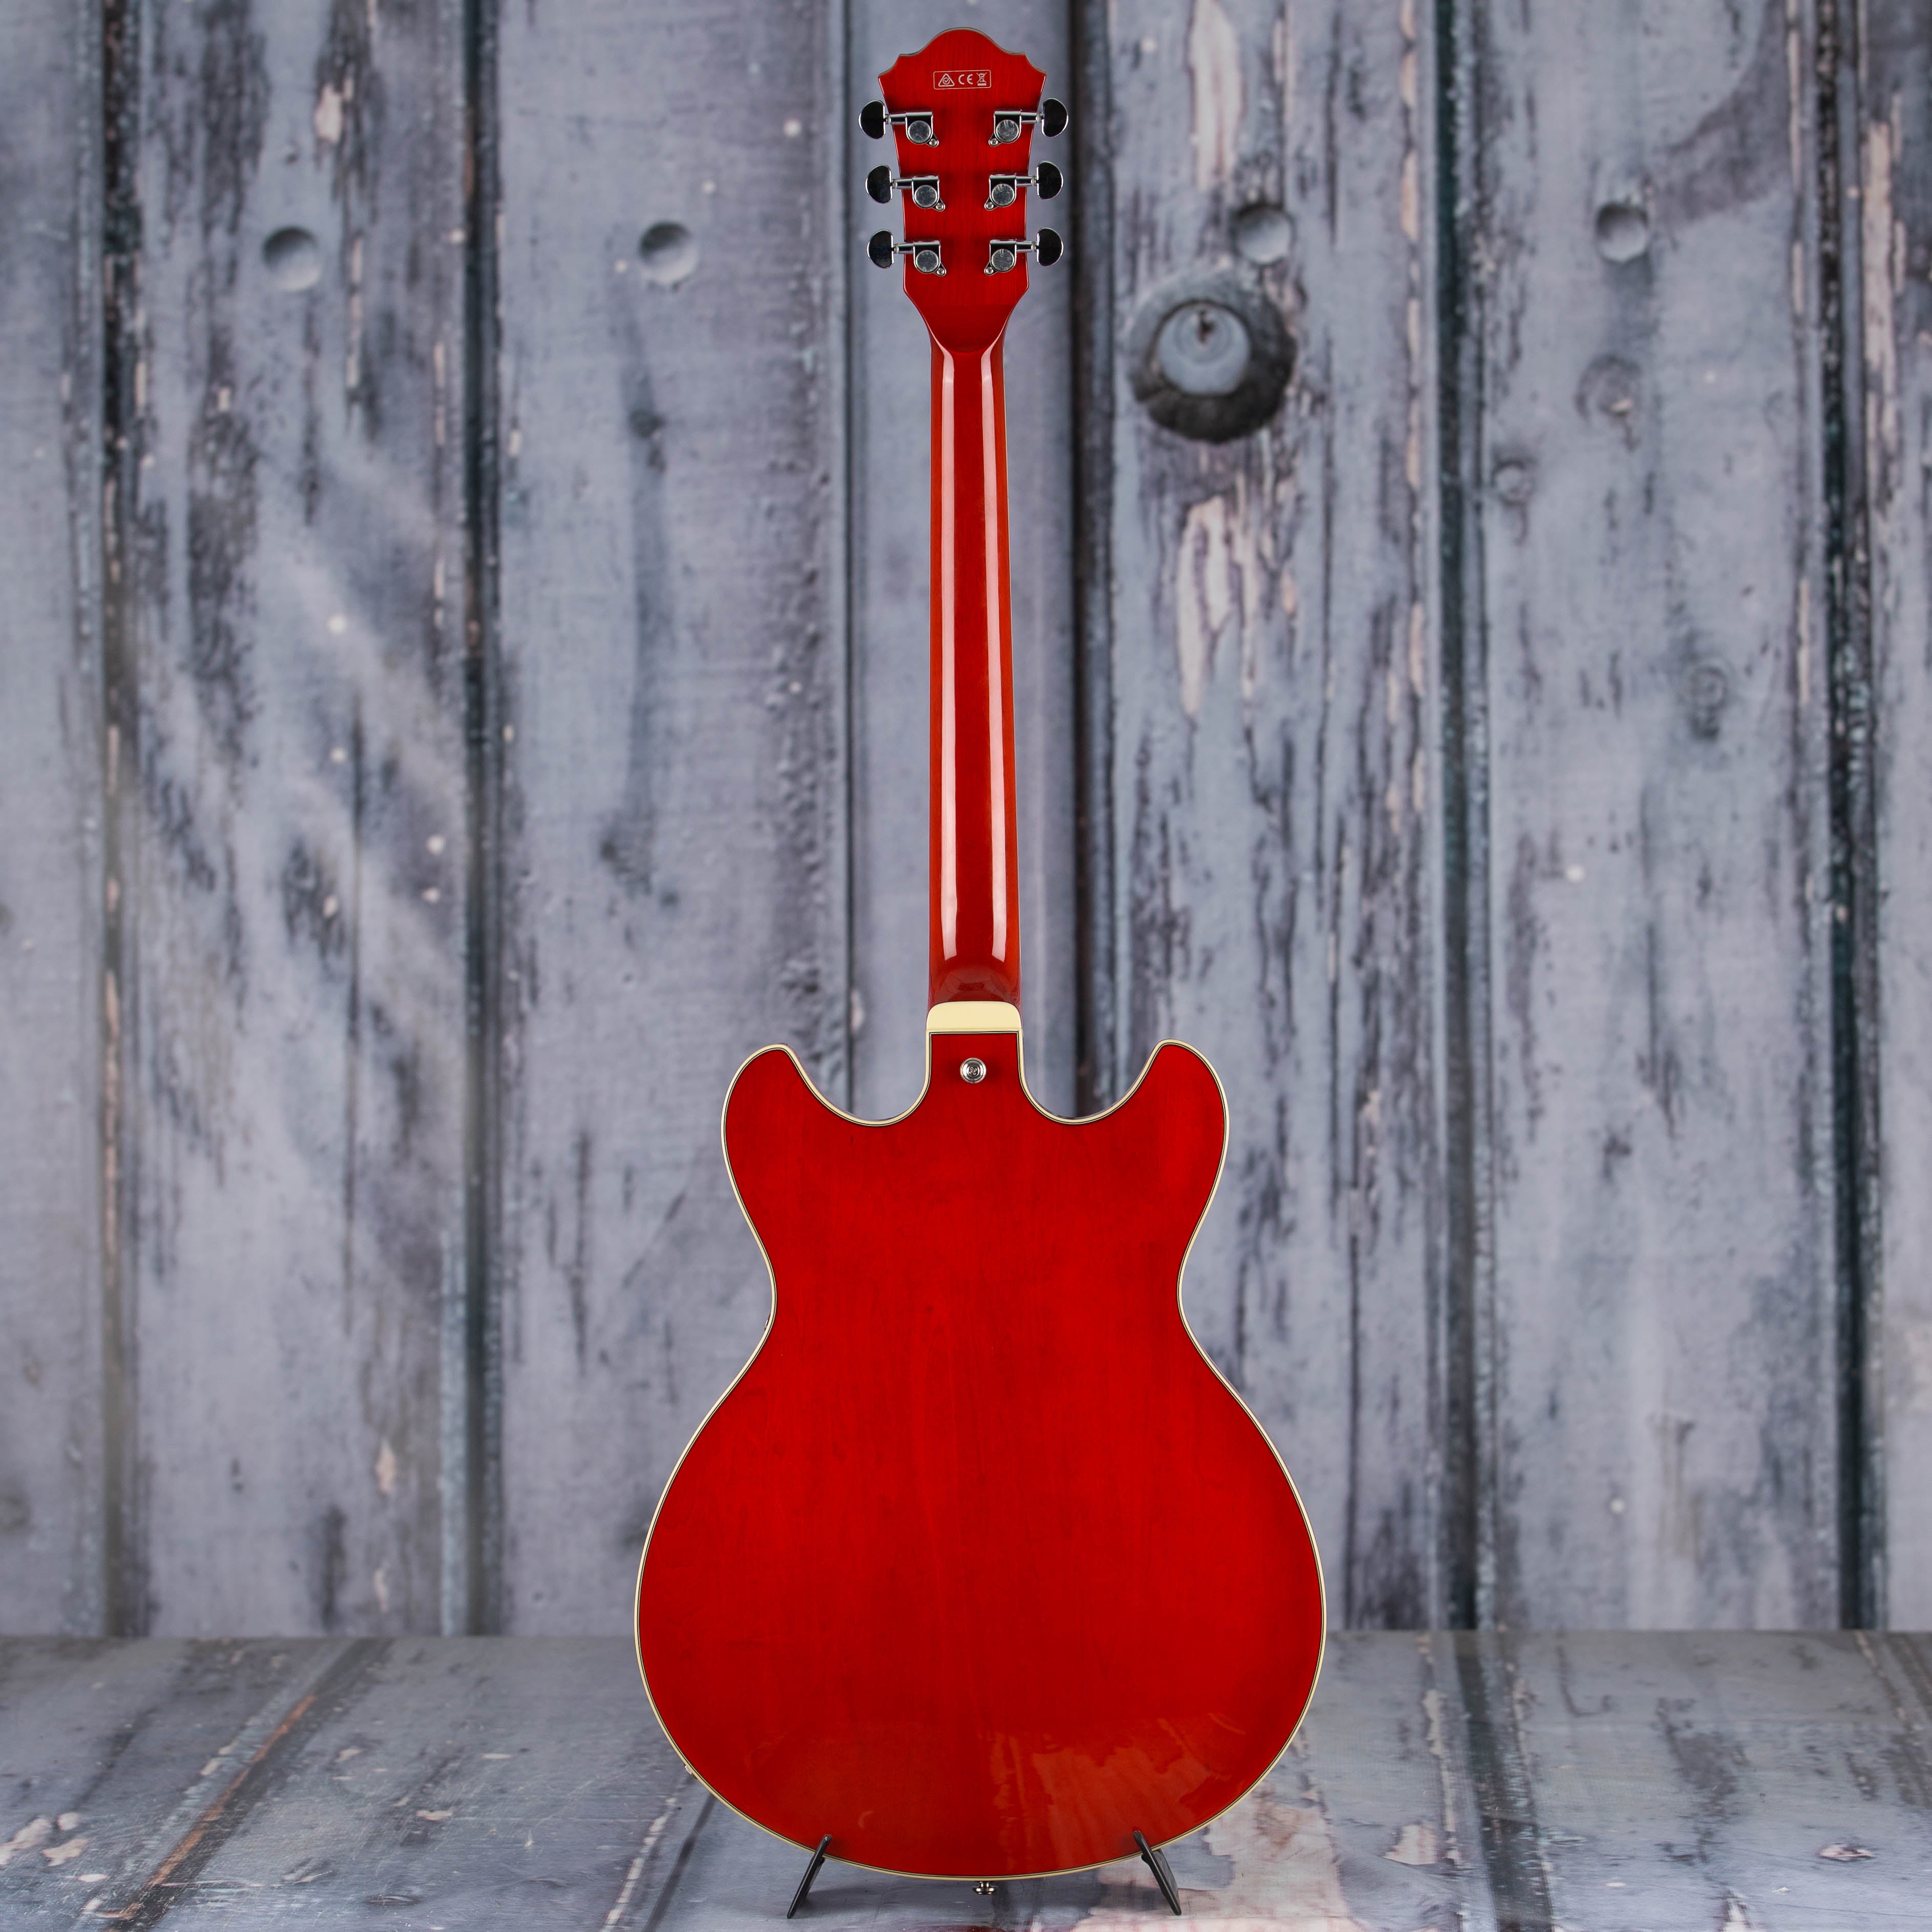 Ibanez Artcore Series AS73 Semi-Hollowbody Guitar, Transparent Cherry Red, back